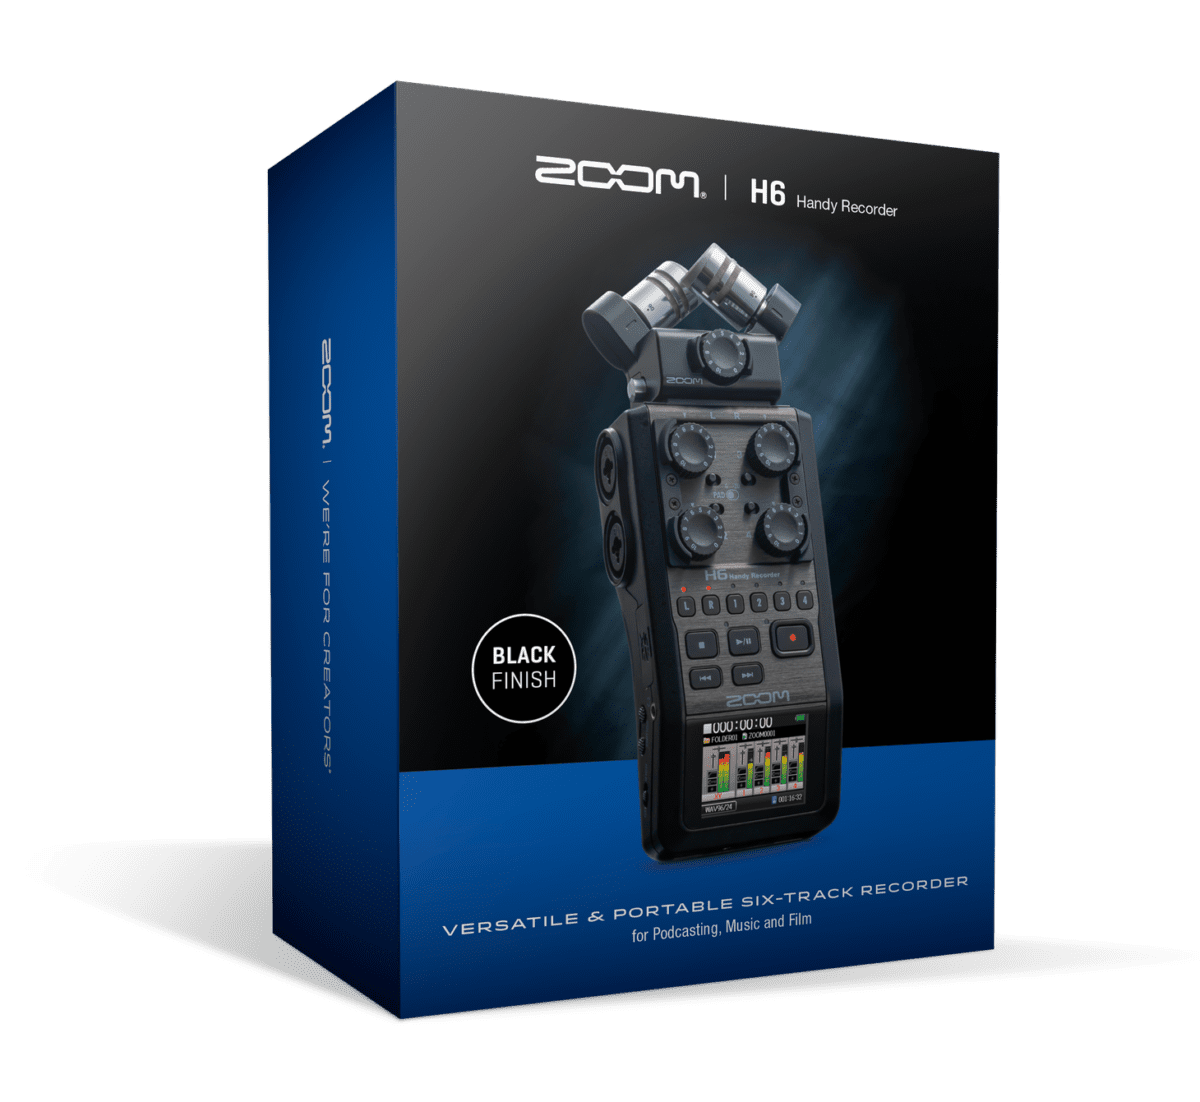 Zoom H6 Handy Recorder Review: Zoom H6 Product Box